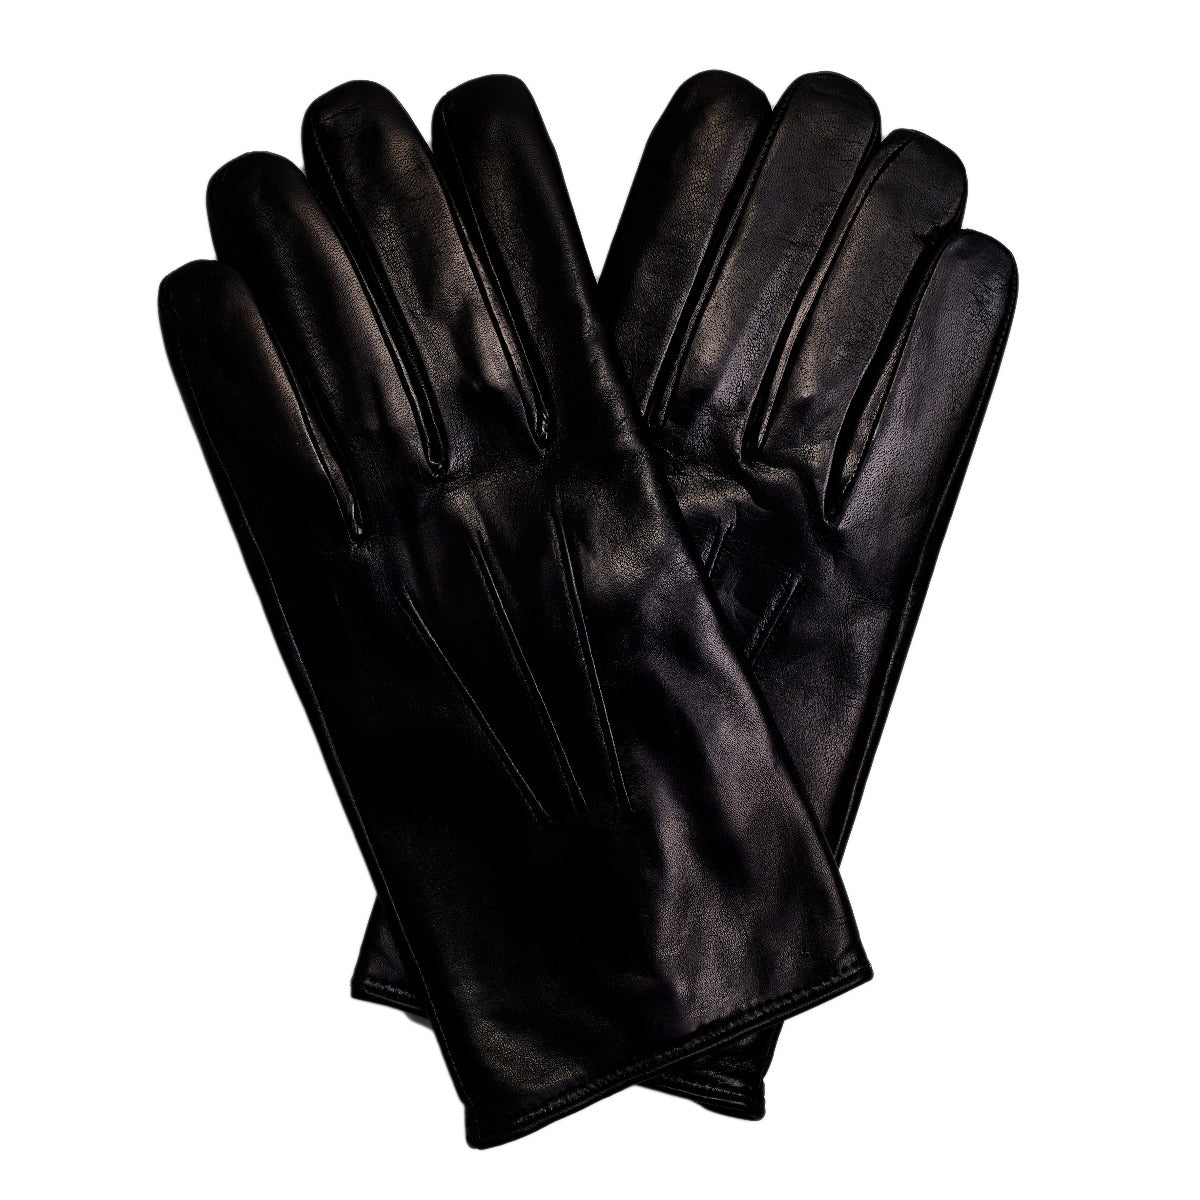 Sovereign Grade Black Napa Leather Gloves, Cashmere Lined ...